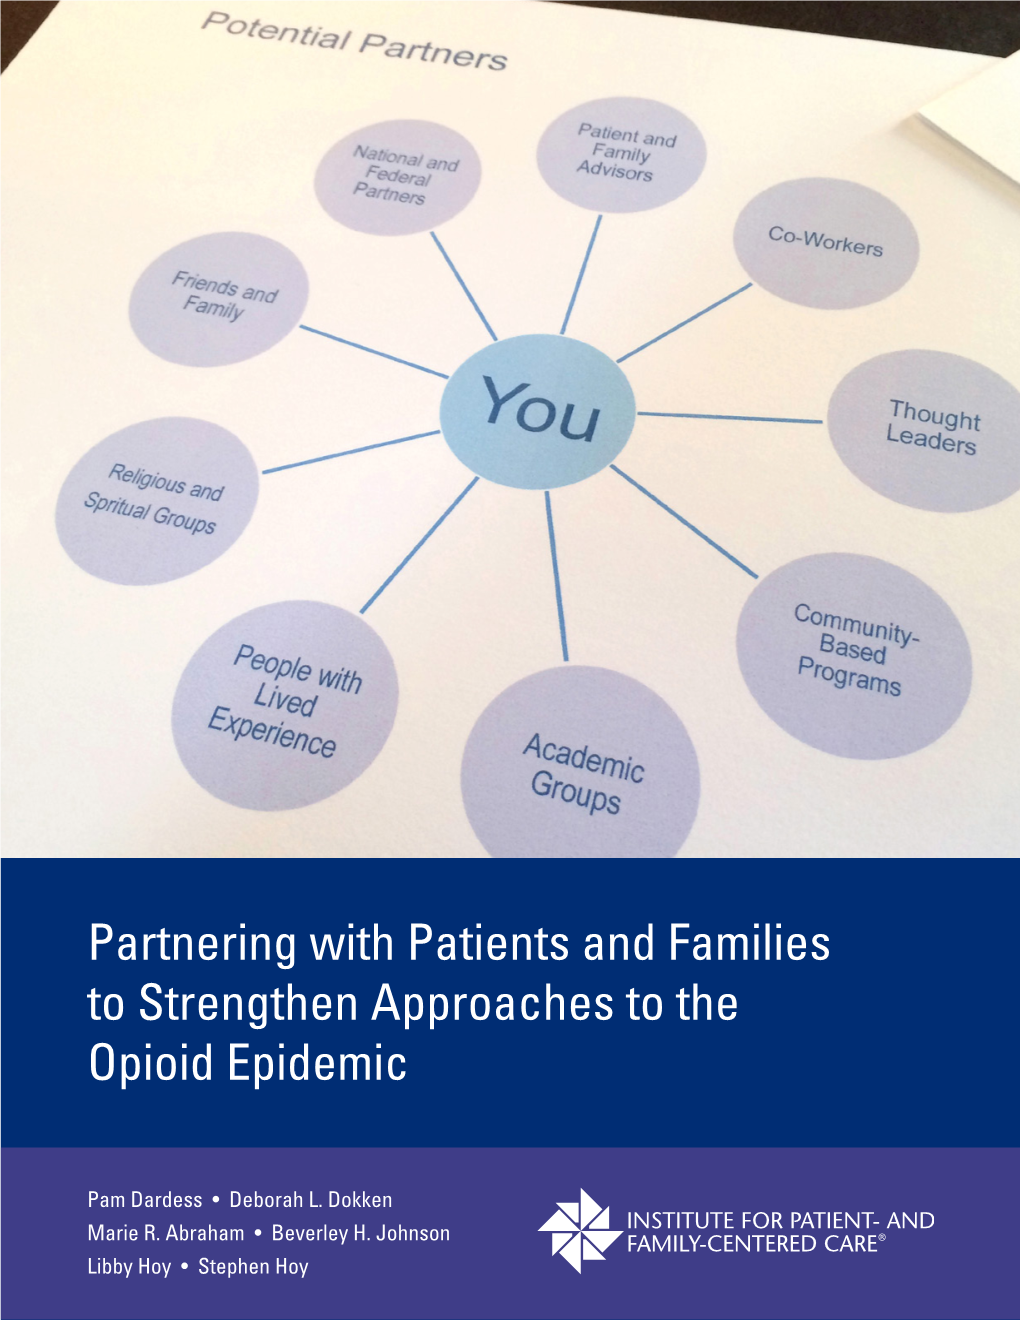 White Paper: Partnering with Patients and Families to Strengthen